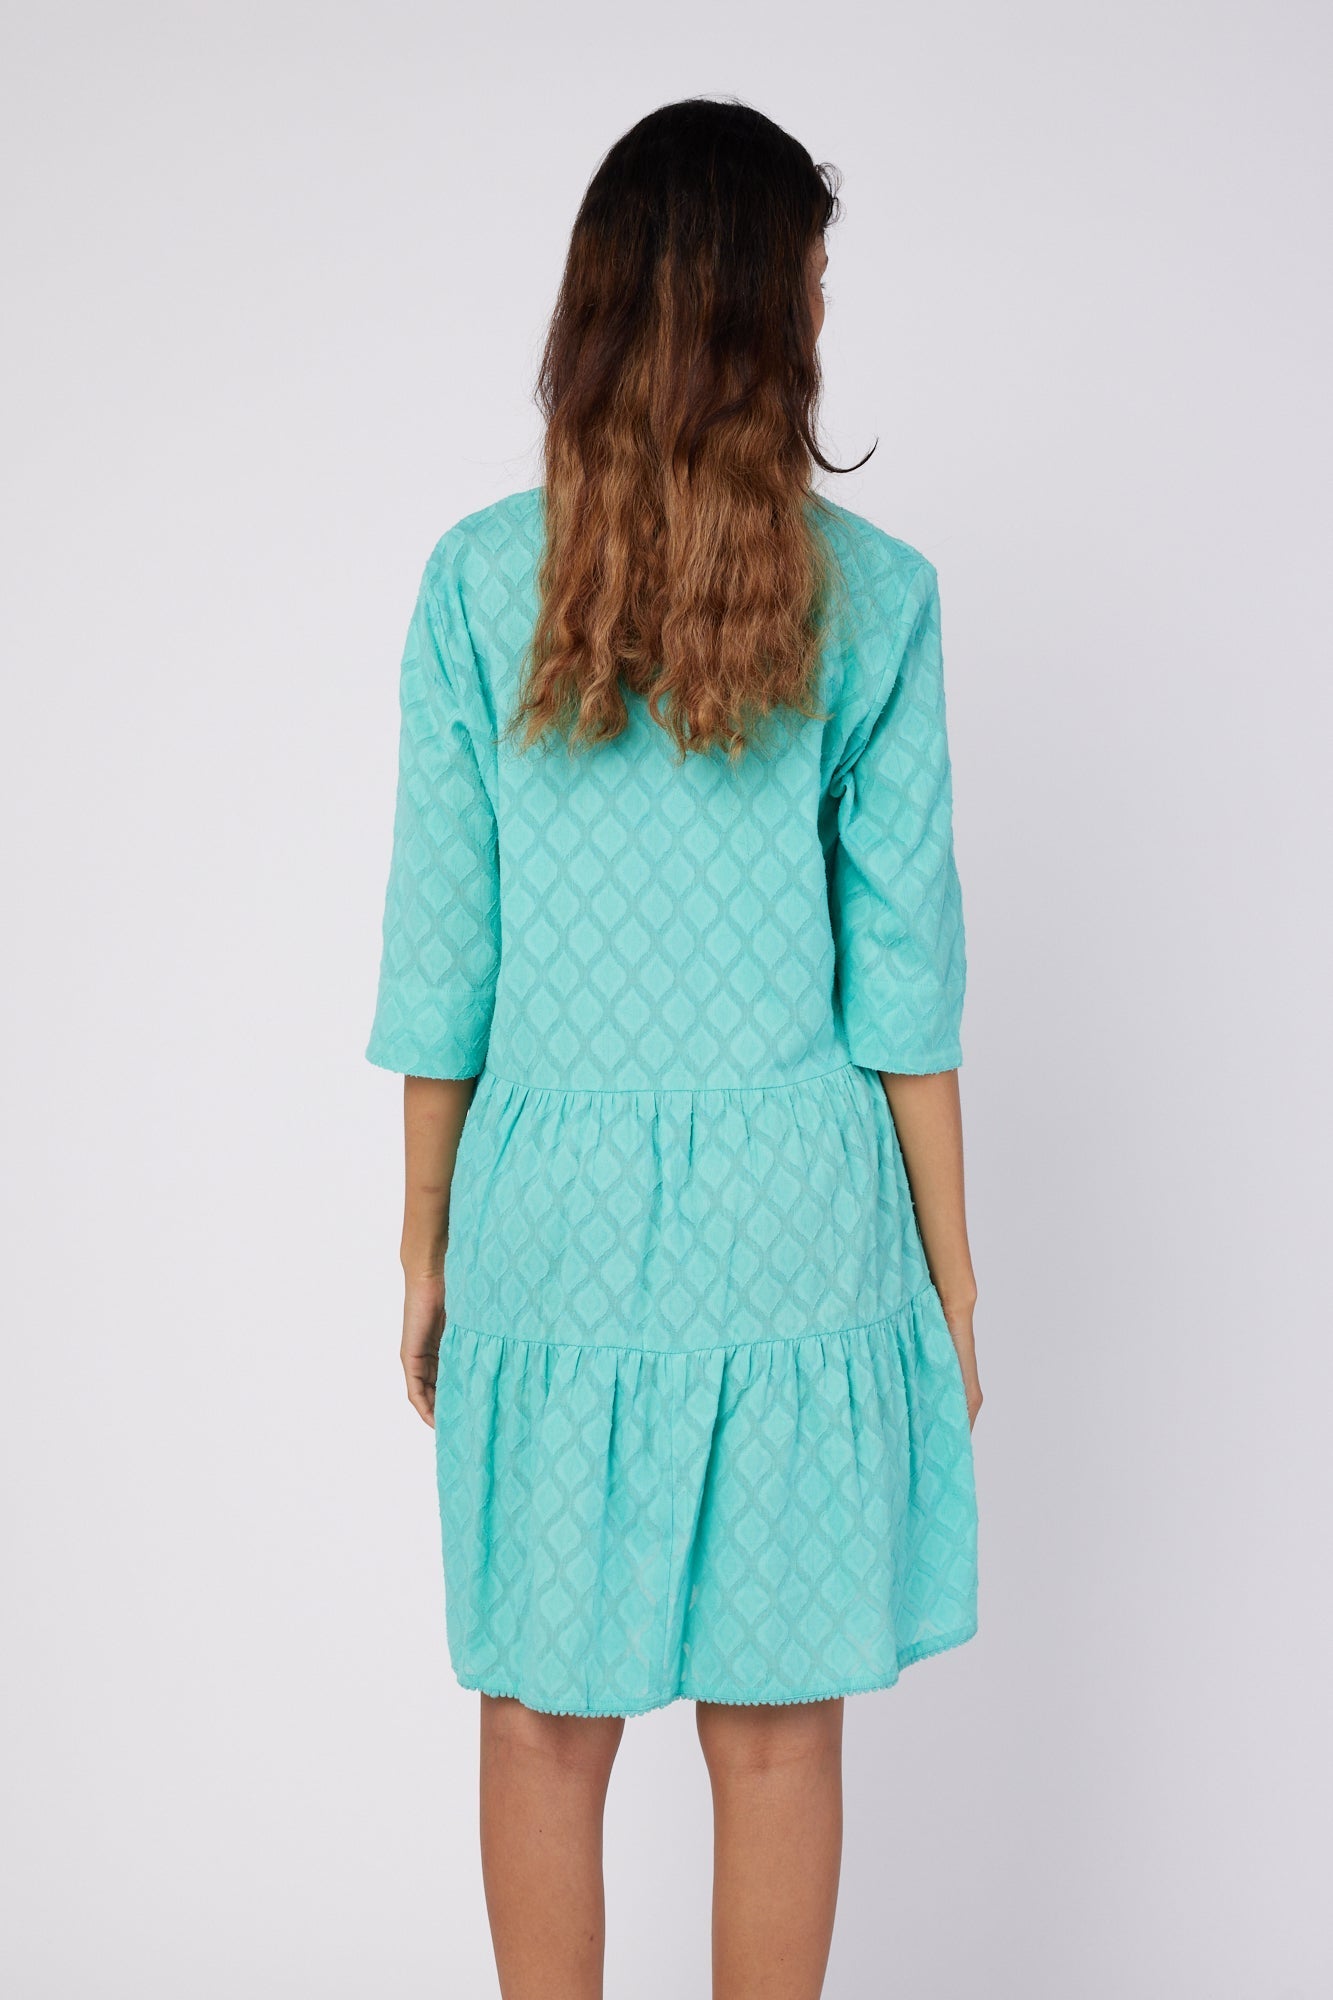 ModaPosa Alcee 3/4 Frill Sleeve Knee Length Jacquard Relaxed Dress with Collar in Floridian . Discover women's resort dresses and lifestyle clothing inspired by the Mediterranean. Free worldwide shipping available!